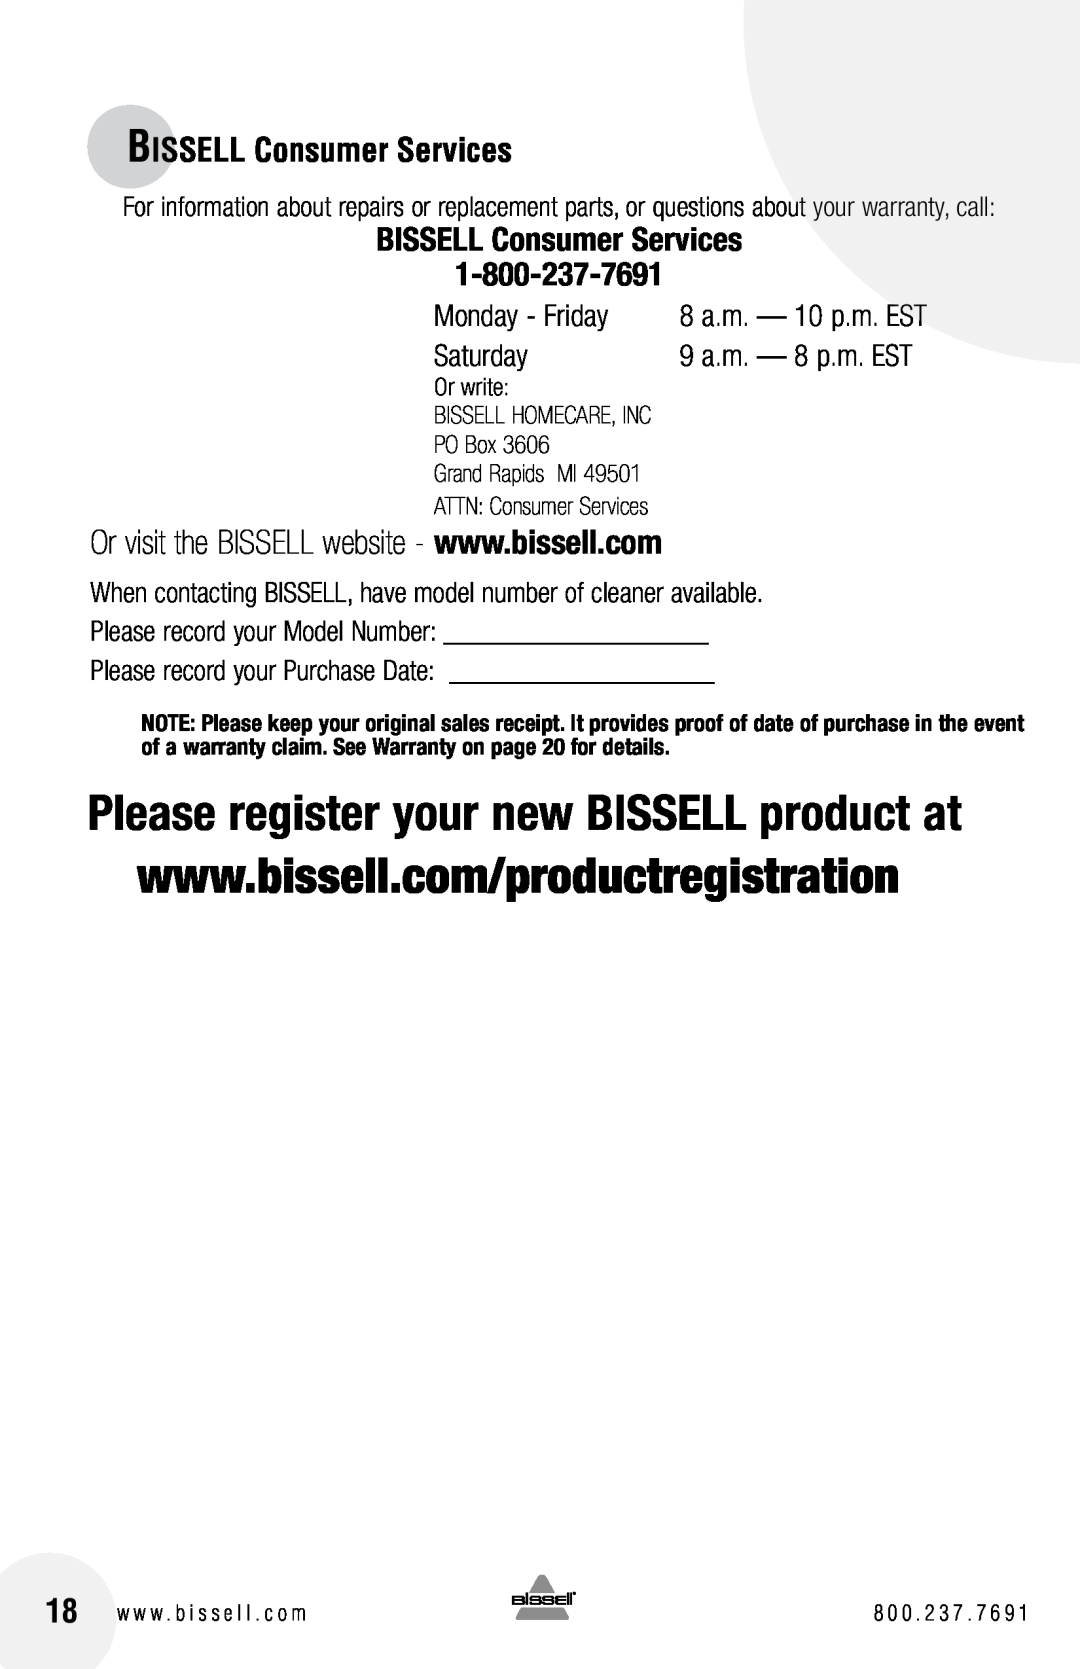 Bissell 16N5 BISSELL Consumer Services, 8 a.m. - 10 p.m. EST, 9 a.m. - 8 p.m. EST, Or write, PO Box, Monday - Friday 